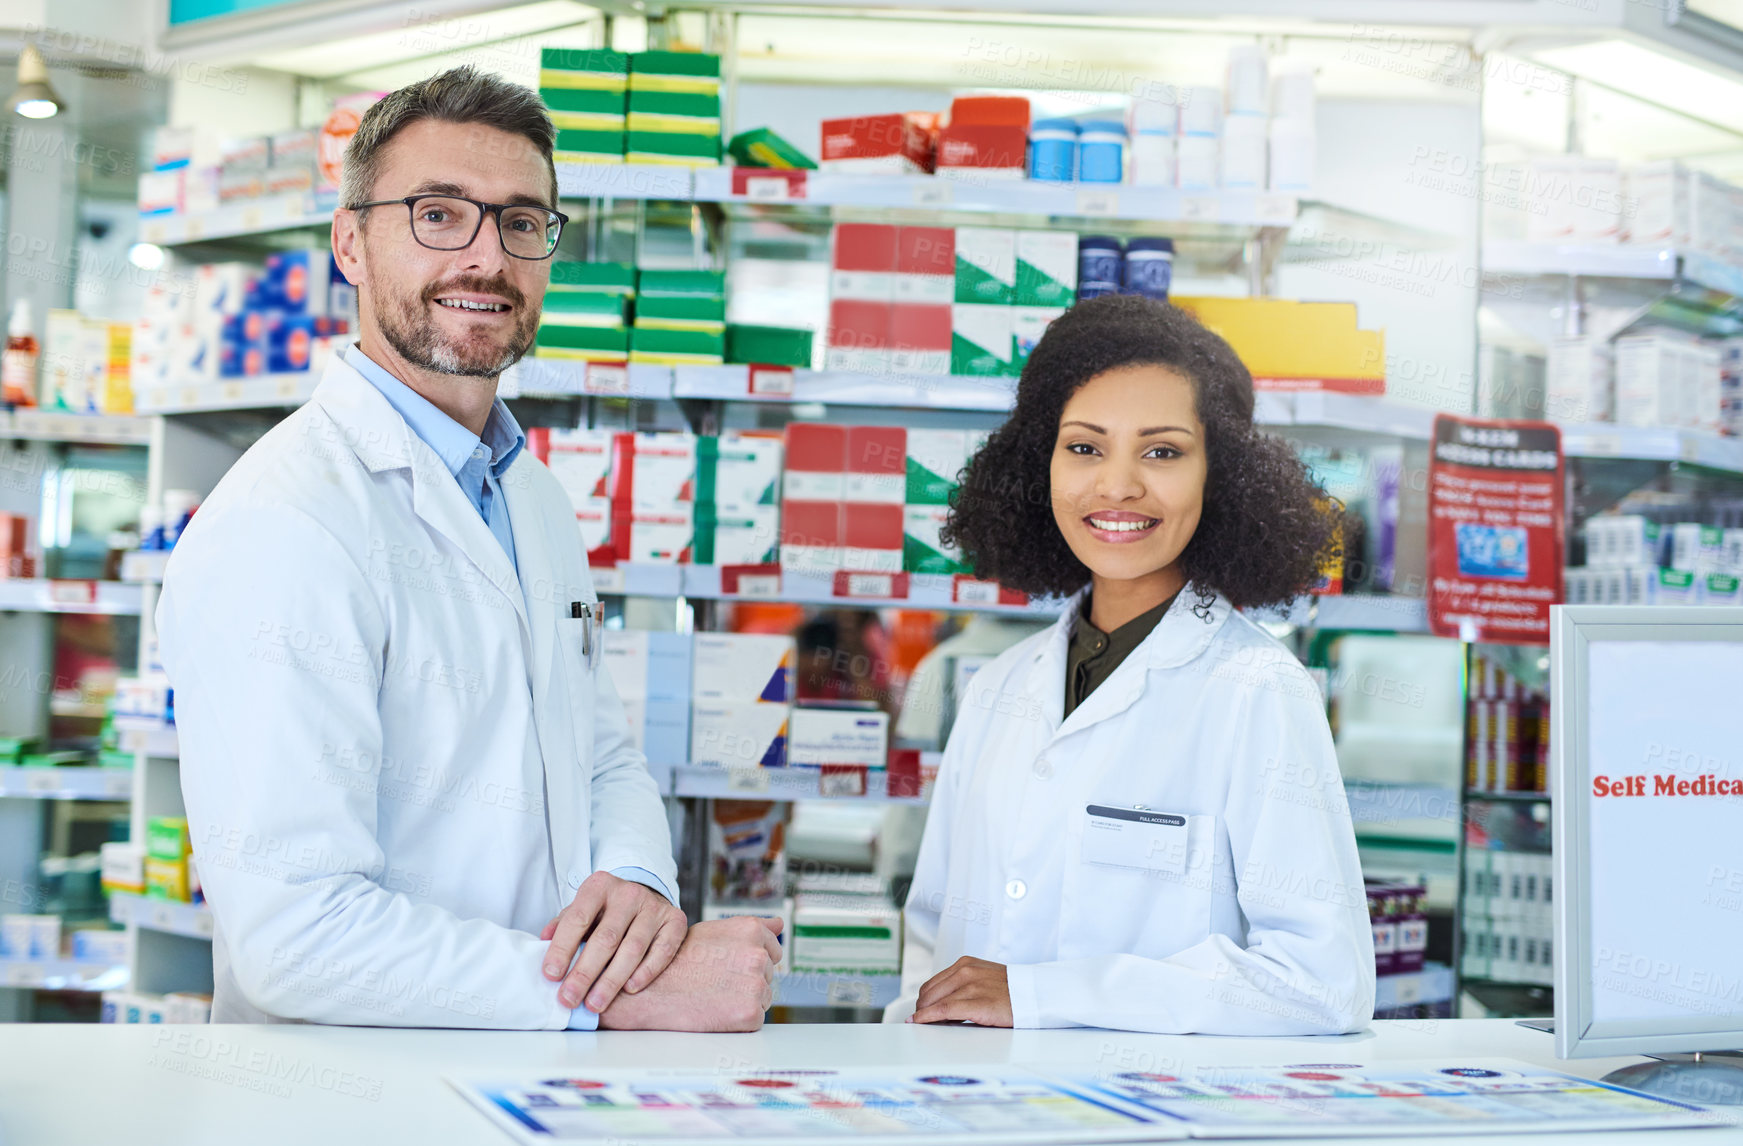 Buy stock photo Portrait of a confident mature man and young woman working together in a pharmacy